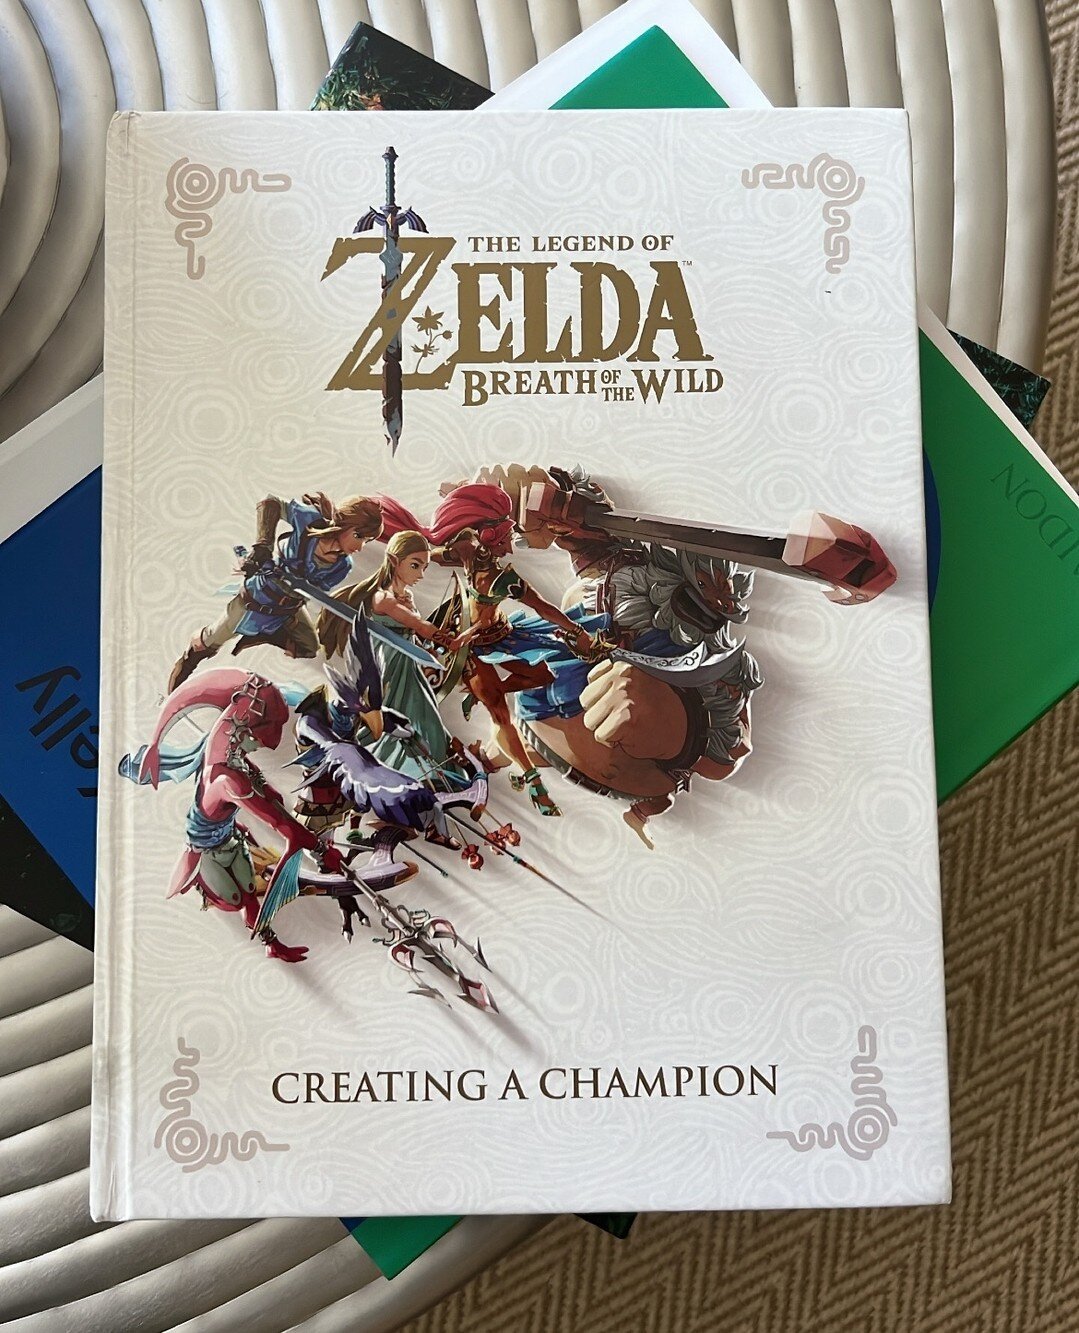 Legend has it that this is the best game ever created. You can argue with your mother.⁠
⁠
#PAGESLifestyle #Bookstagram #Zelda